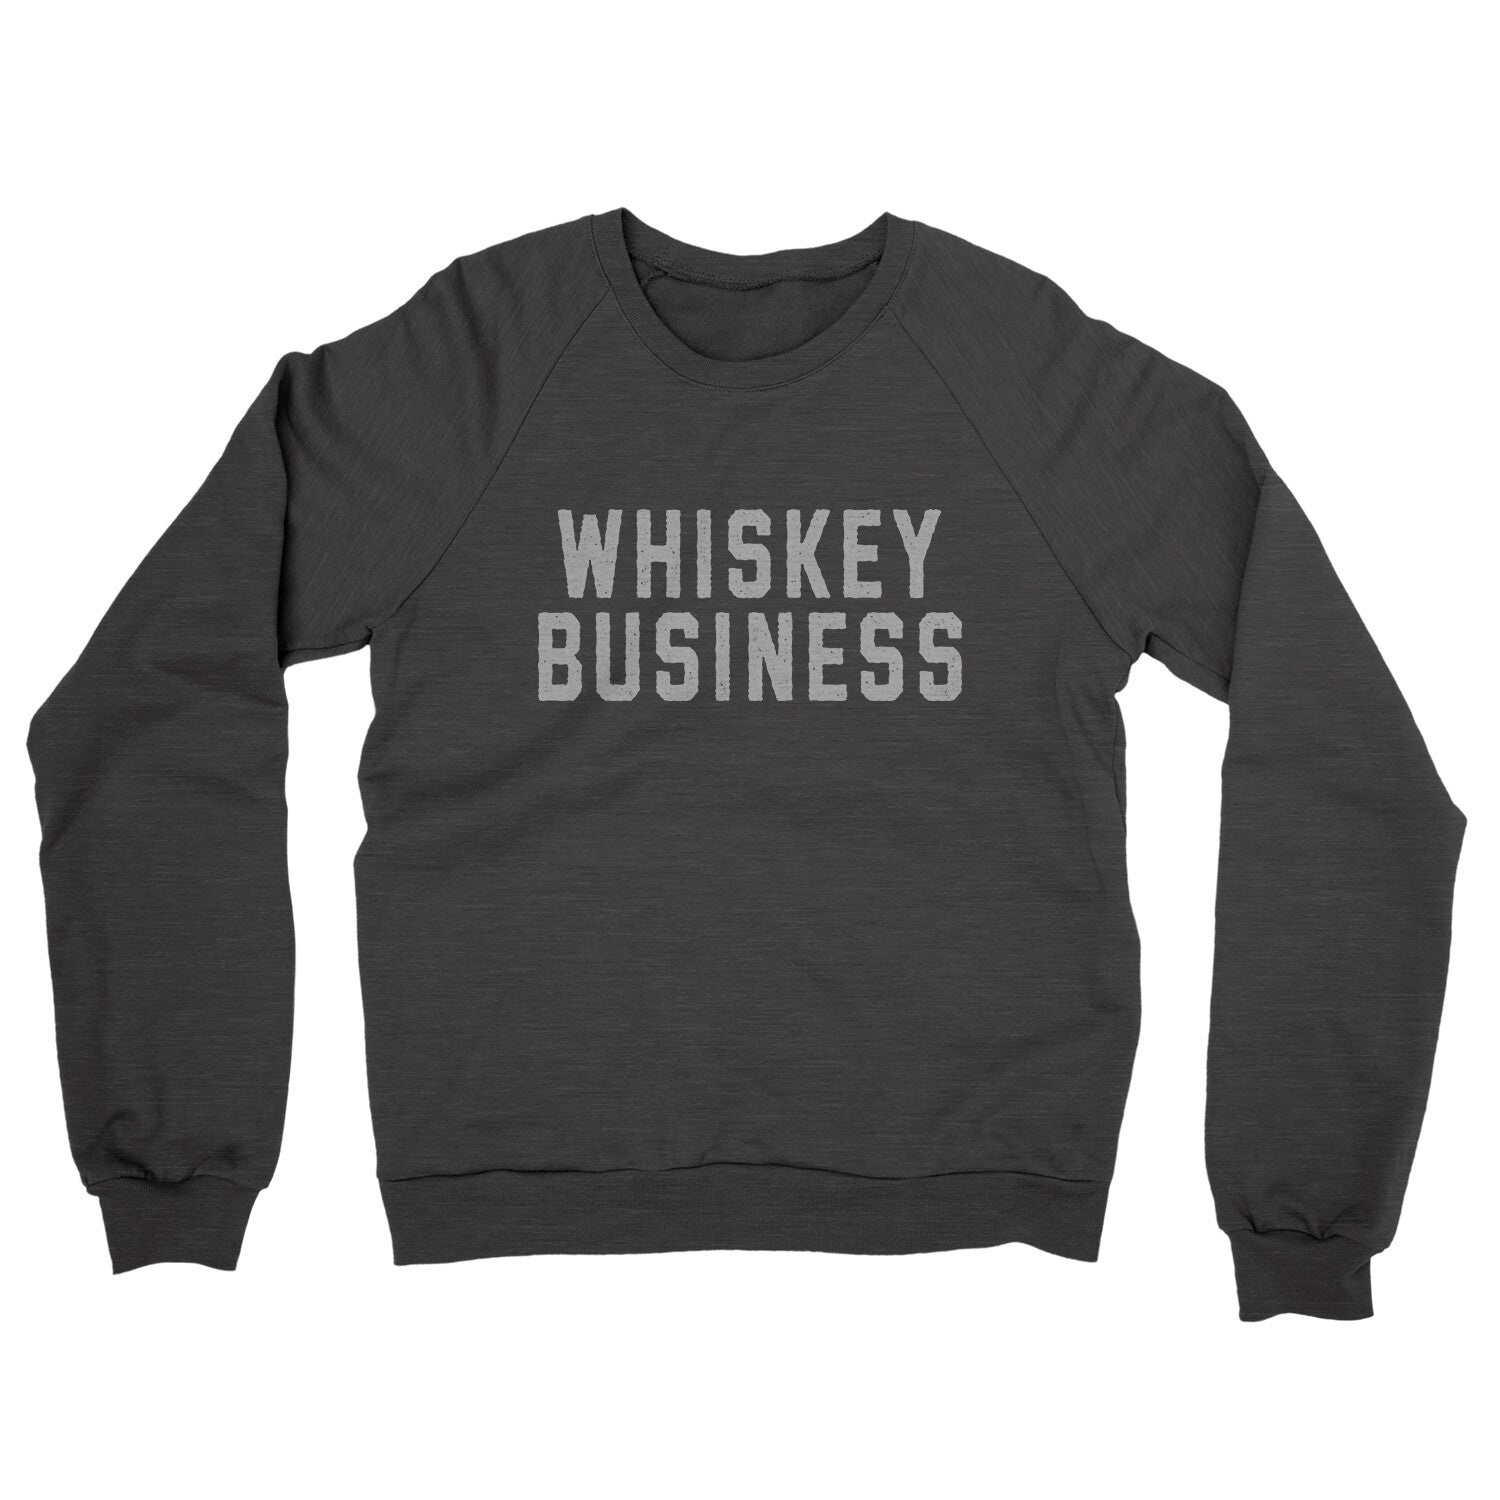 Whiskey Business in Charcoal Heather Color